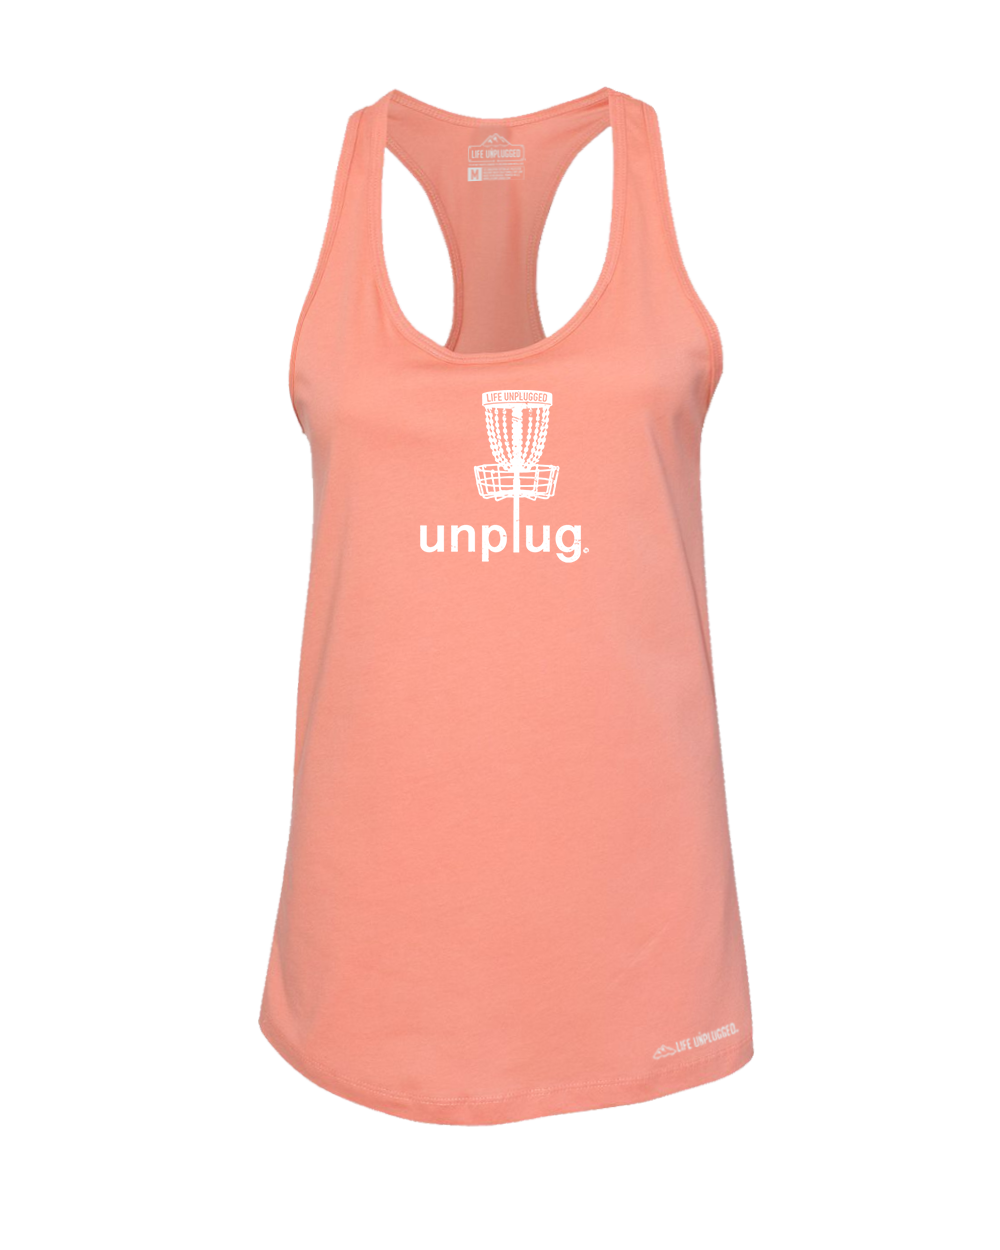 Disc Golf Premium Women's Relaxed Fit Racerback Tank Top - Life Unplugged